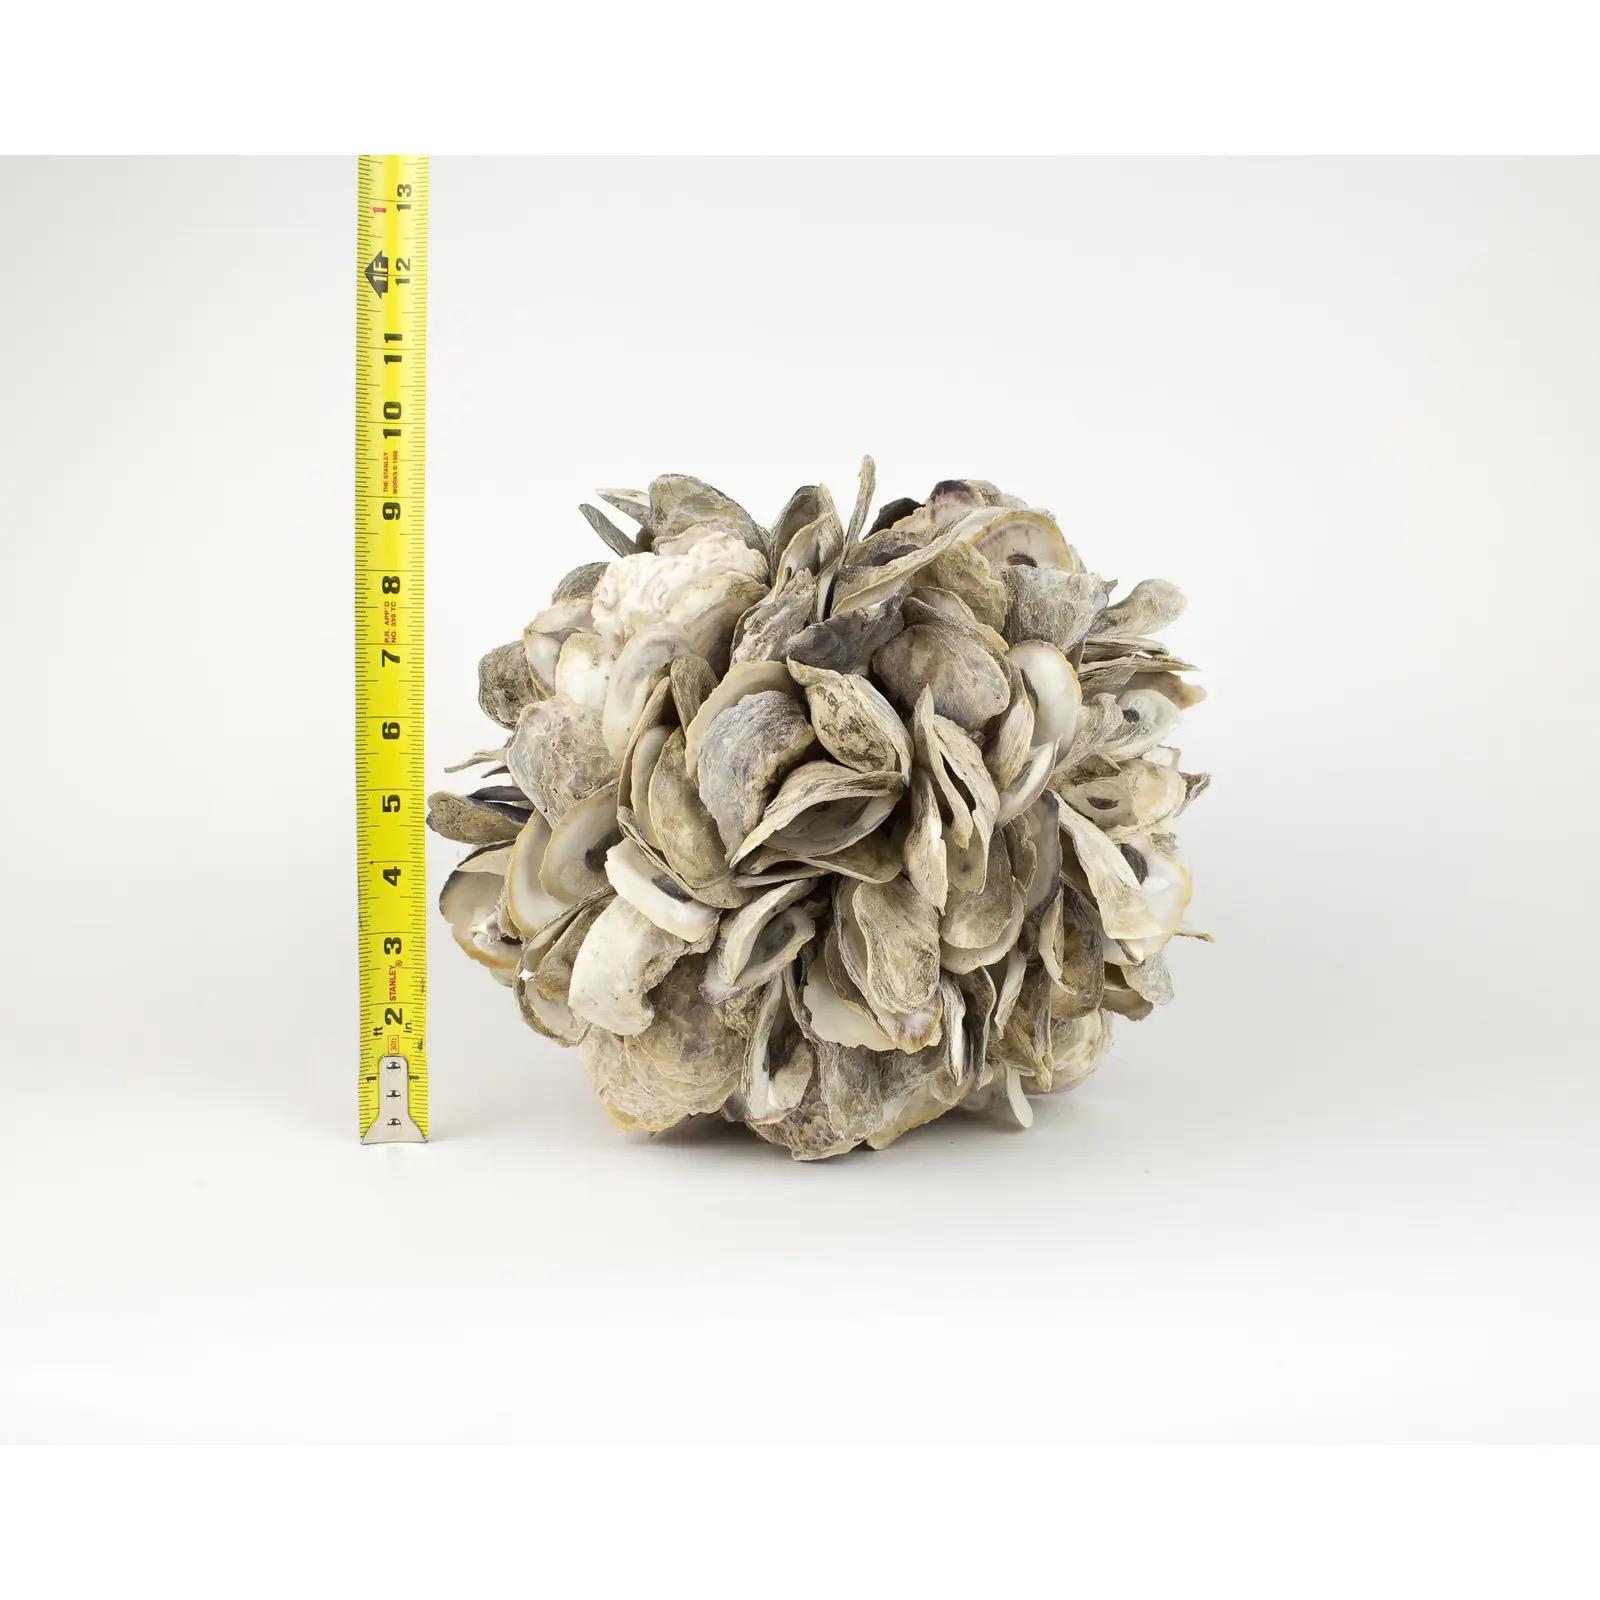 Large Natural Oyster Shell Sphere Sculpture 4